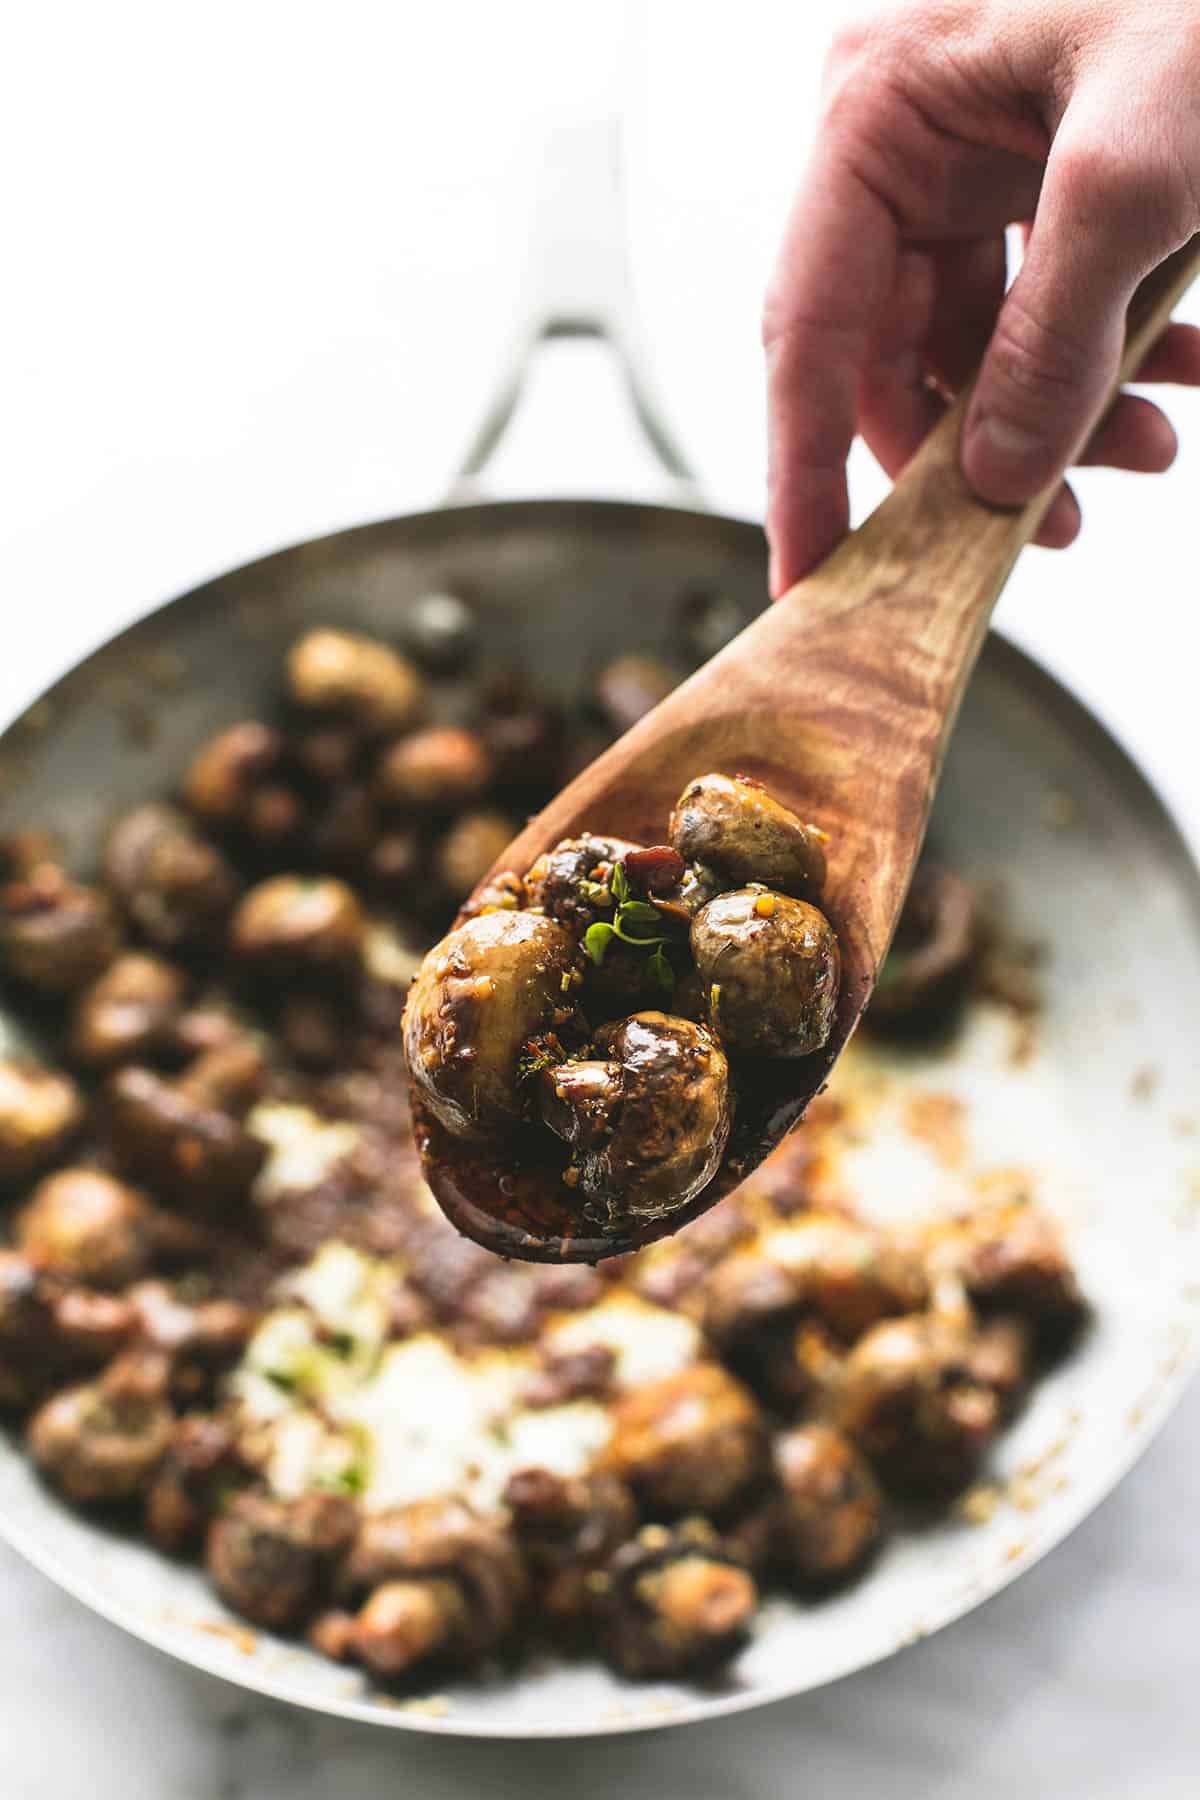 a hand holding a scoop of sautéed garlic butter mushrooms in a wooden serving spoon above a skillet of more mushrooms.